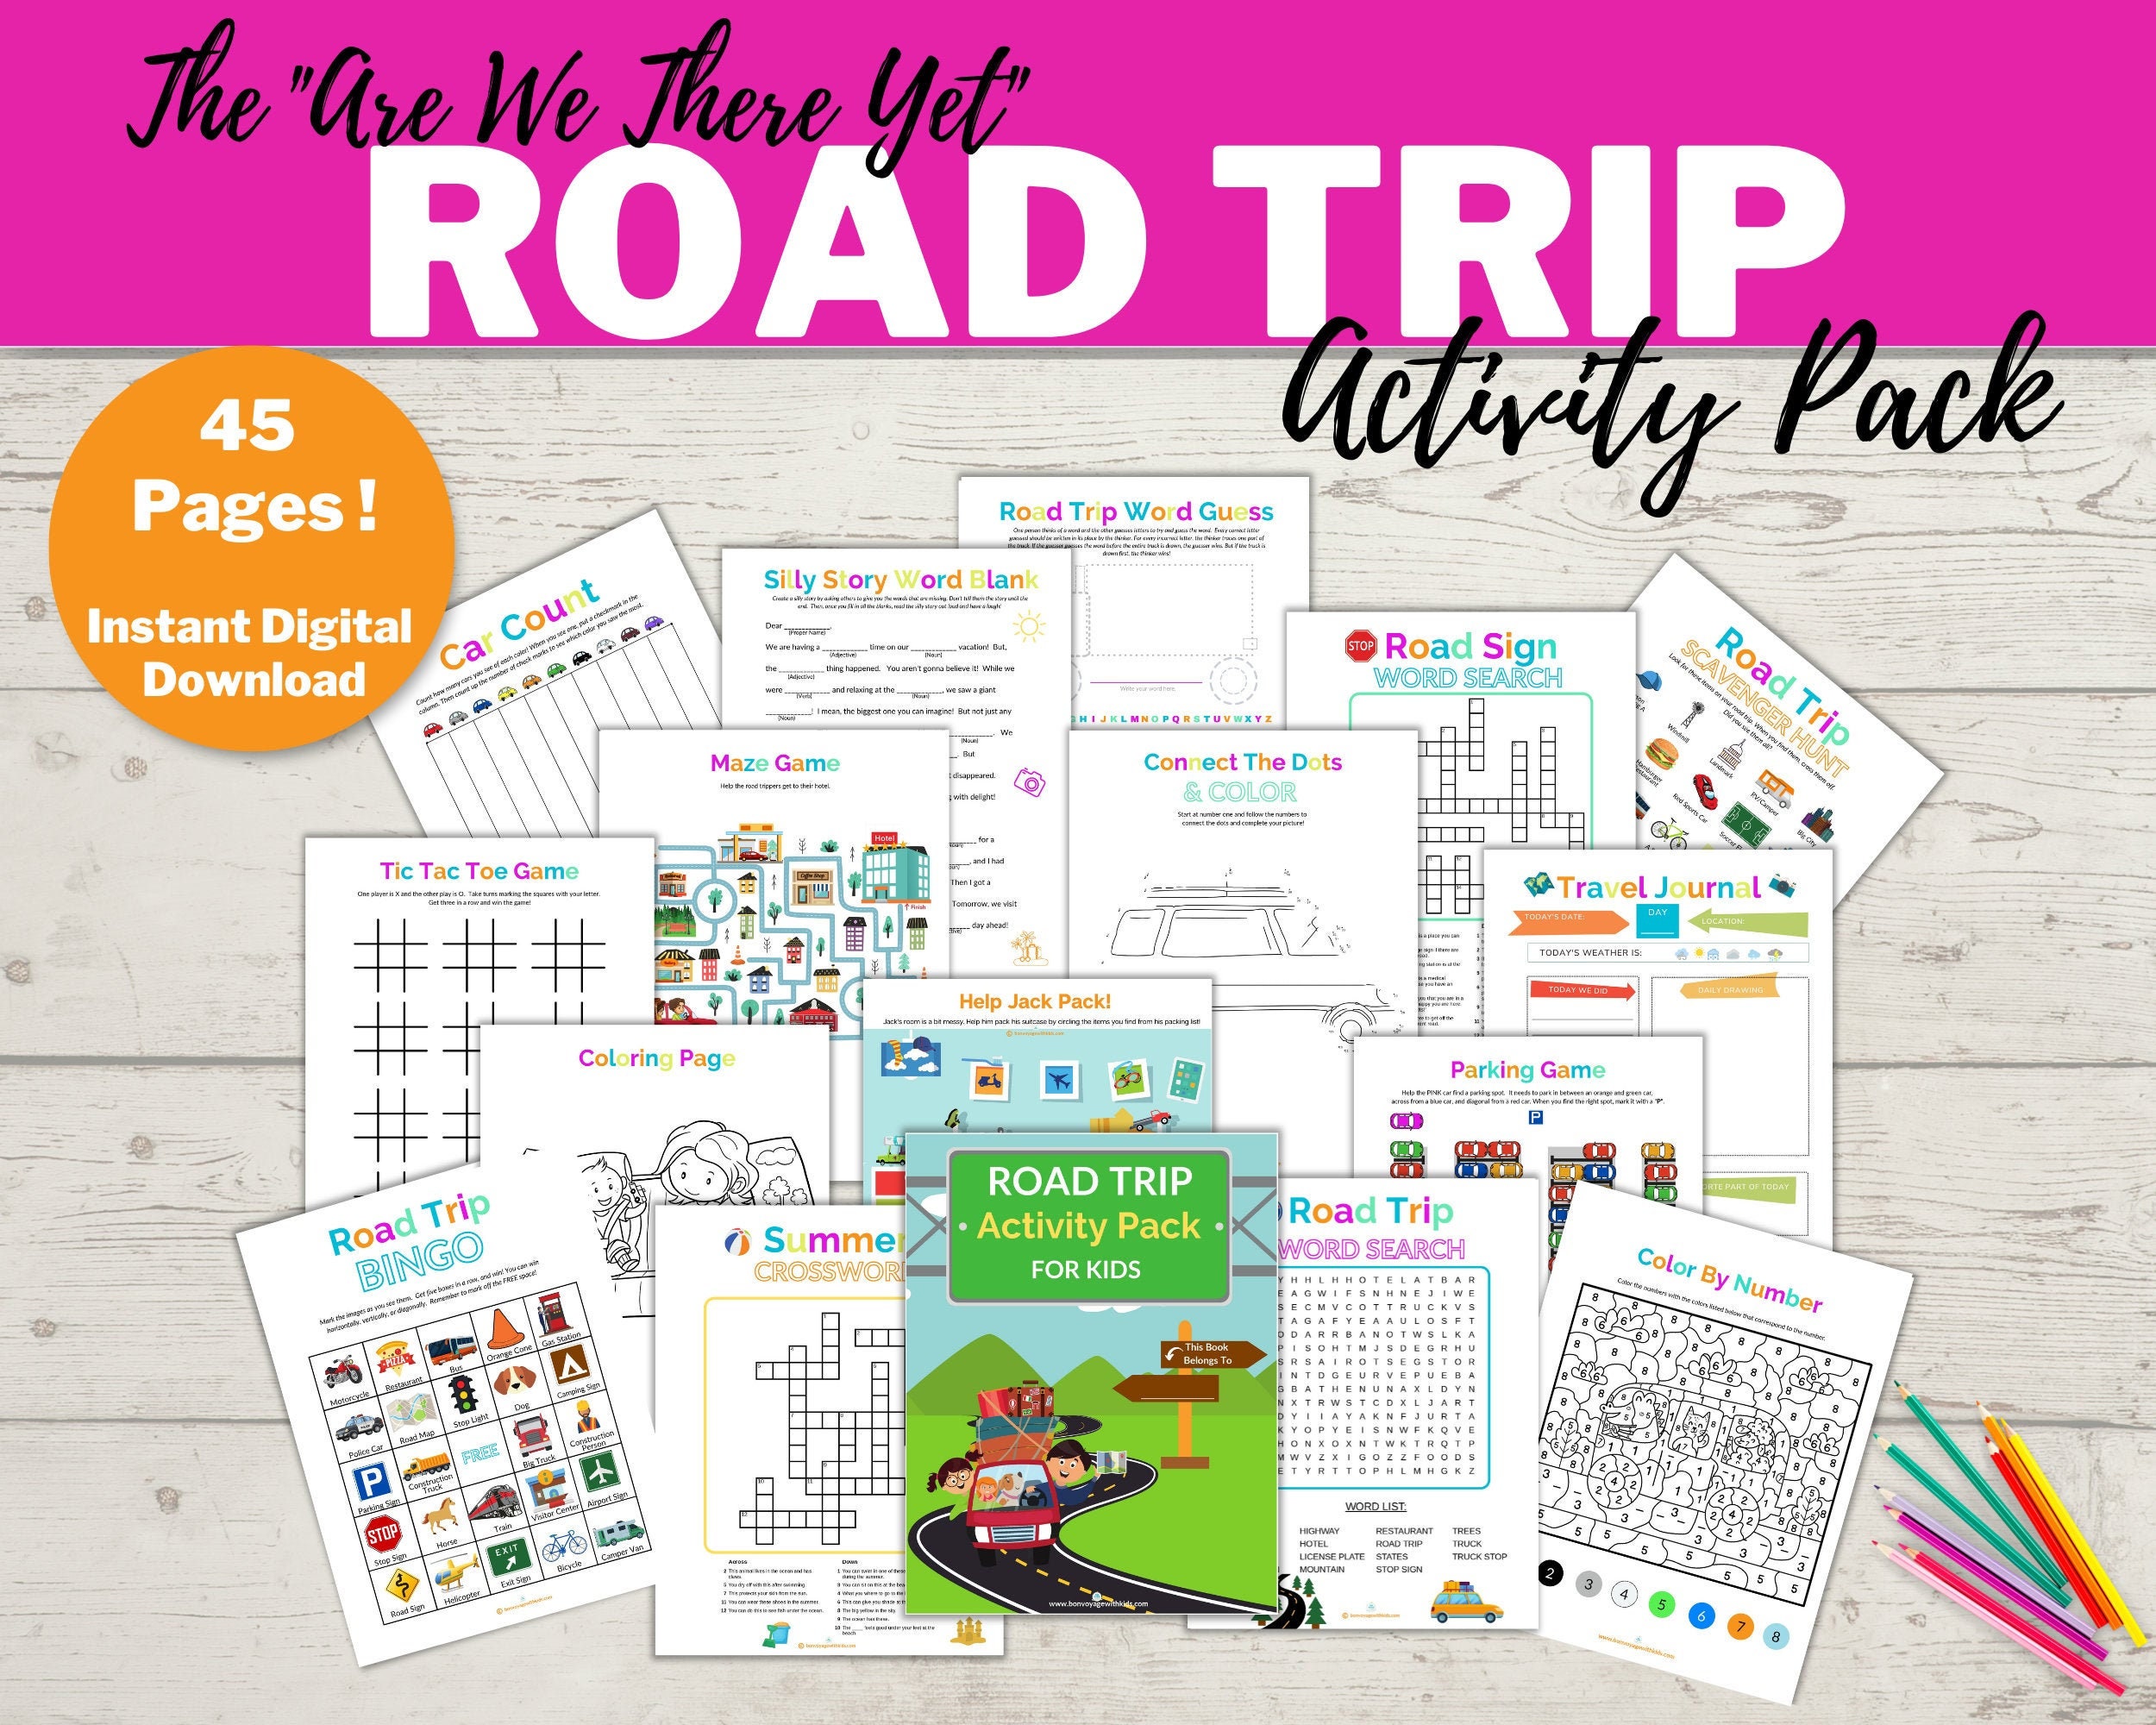 Printable Travel Activities: Activity book for adults with 100 travel based  activities and 100 travel tips, Adult Activity and Variety Puzzles Bundle